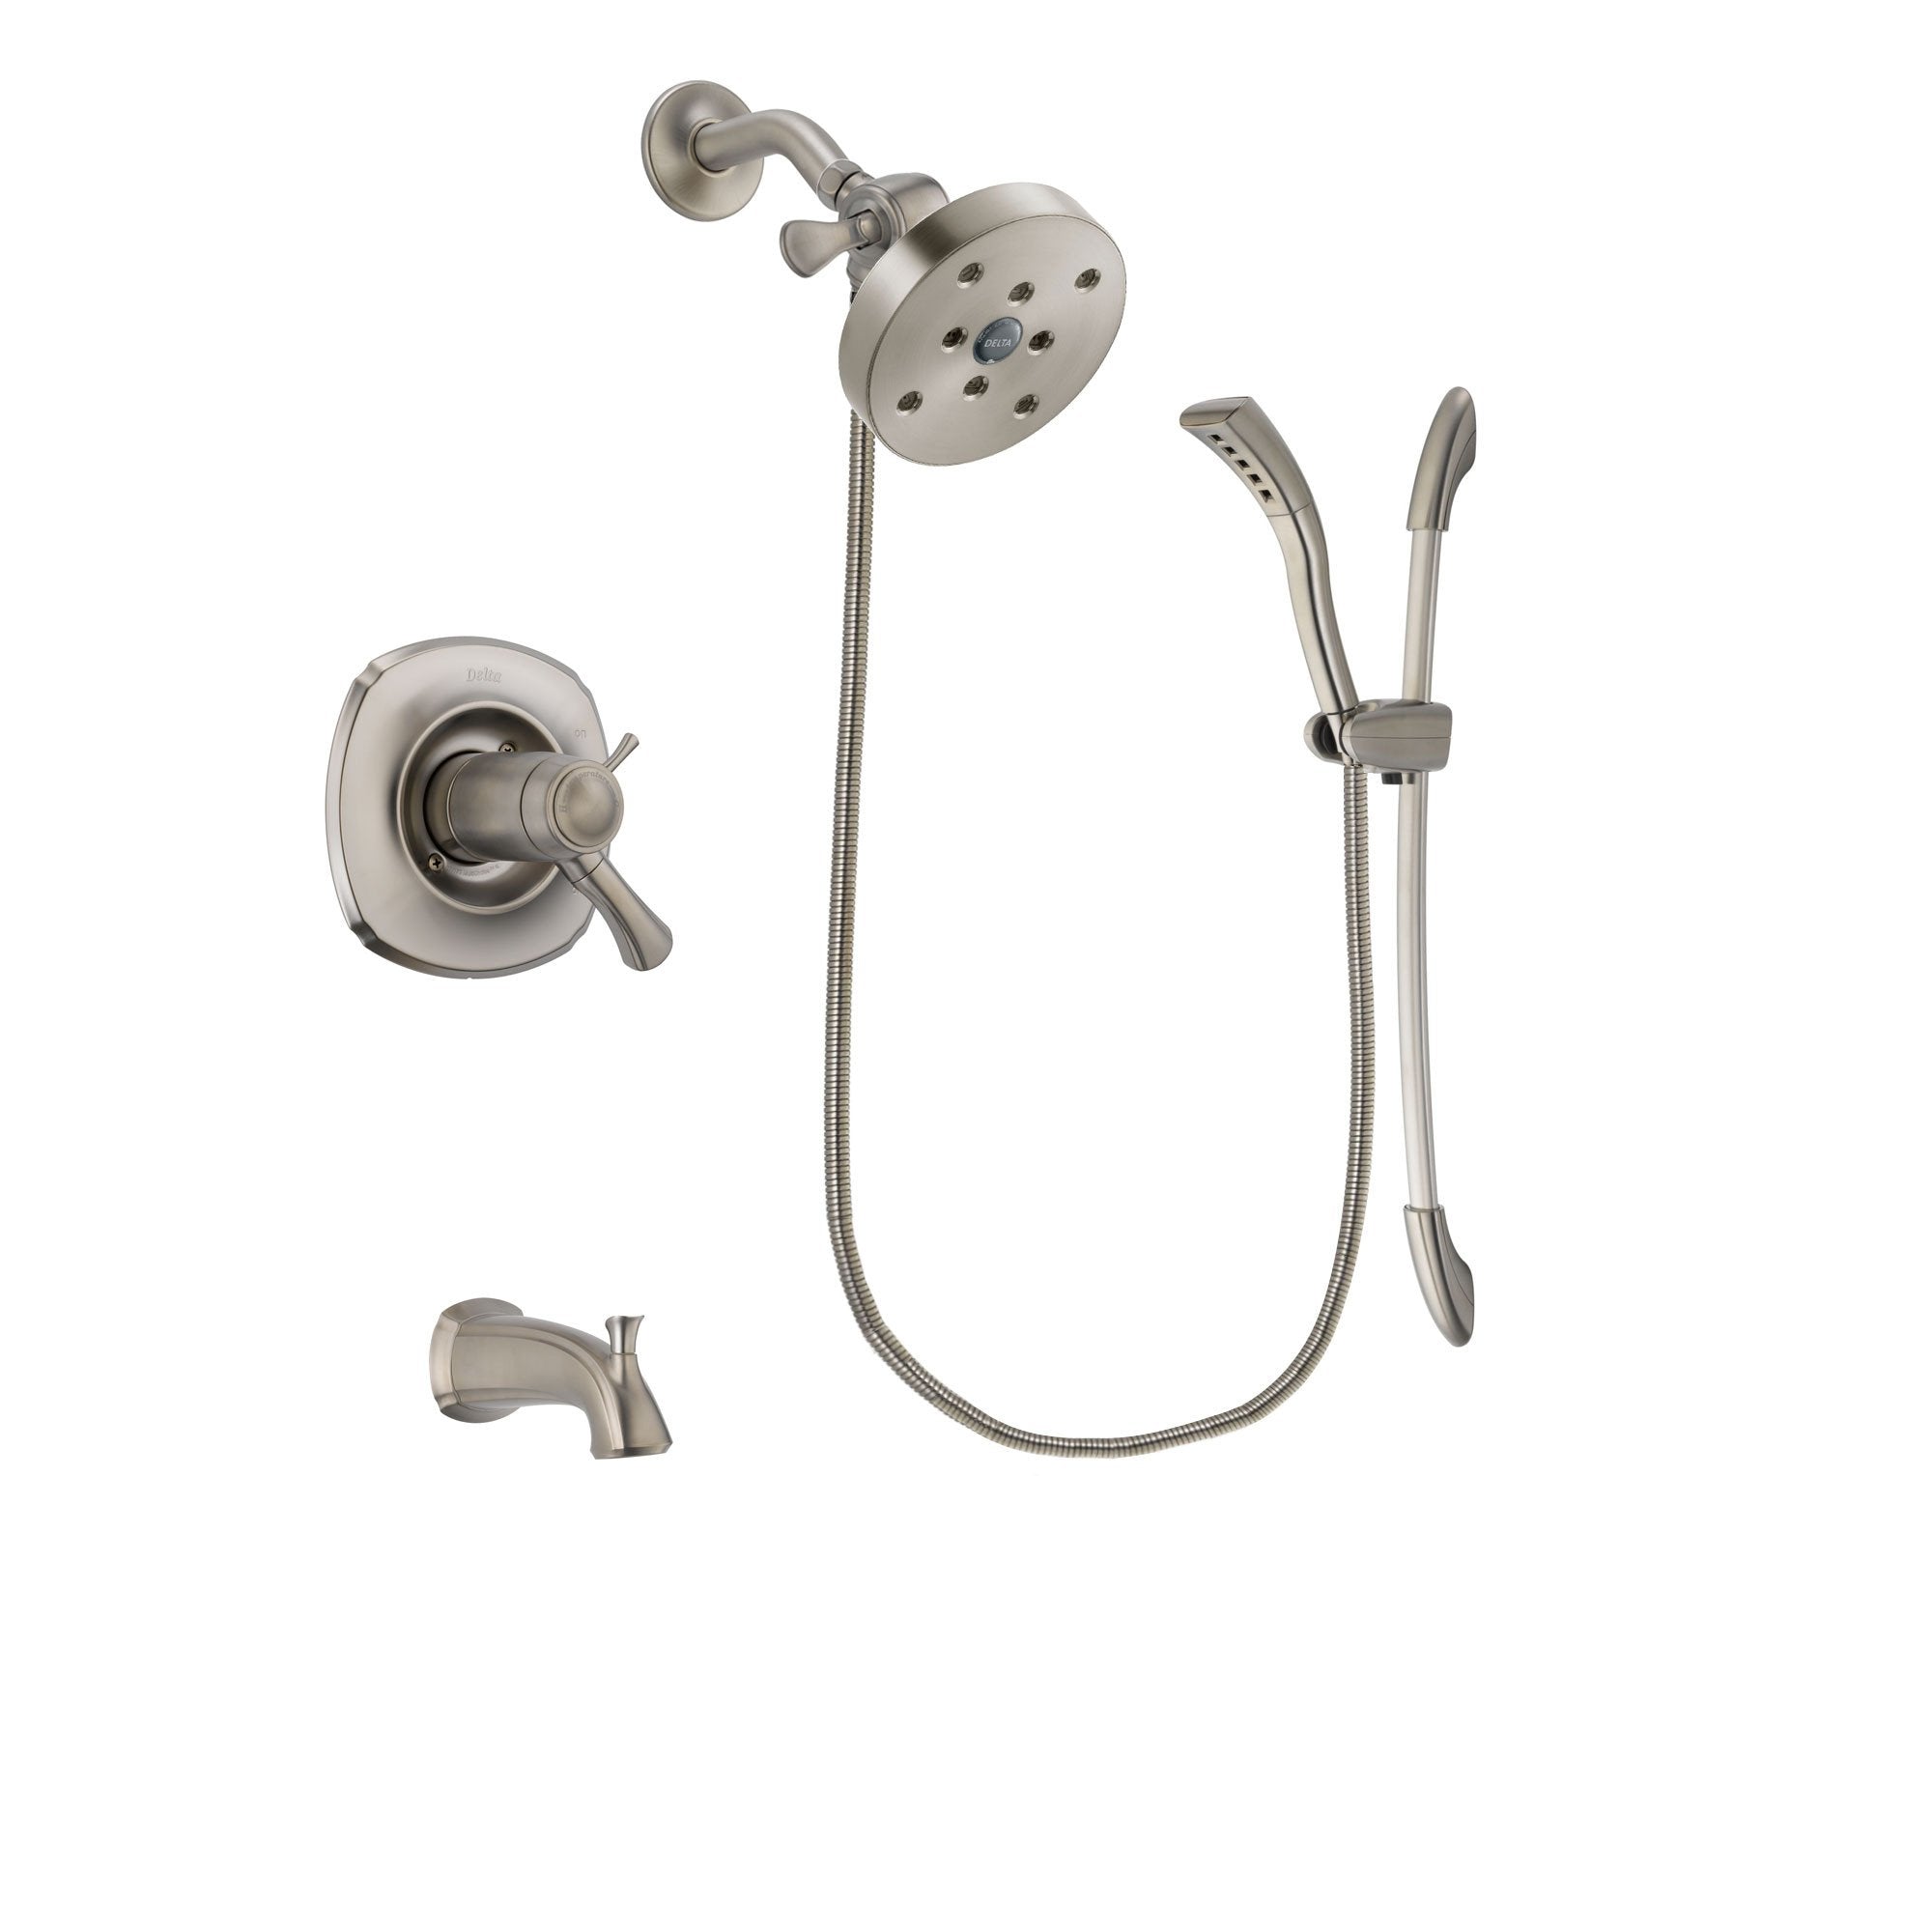 Delta Addison Stainless Steel Finish Thermostatic Tub and Shower Faucet System Package with 5-1/2 inch Shower Head and Handshower with Slide Bar Includes Rough-in Valve and Tub Spout DSP1485V